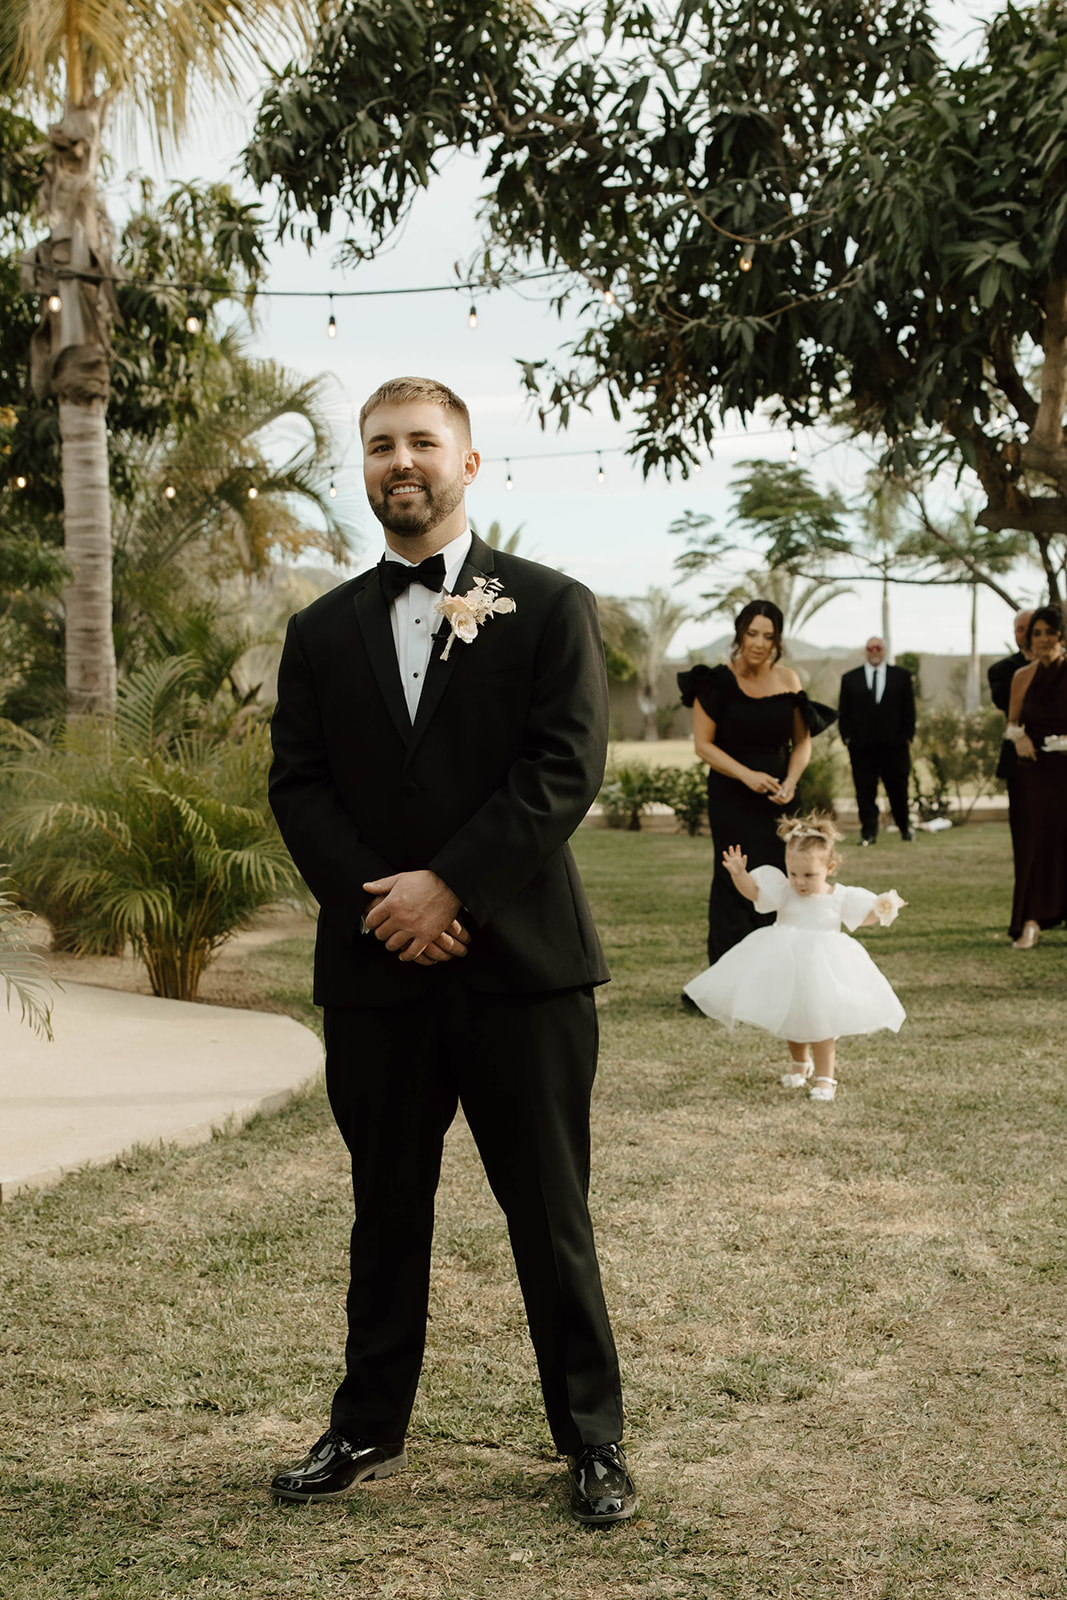 A man in a black tuxedo stands smiling at an outdoor wedding, while a child in a white dress walks behind and guests look on to do a father- daughter first look